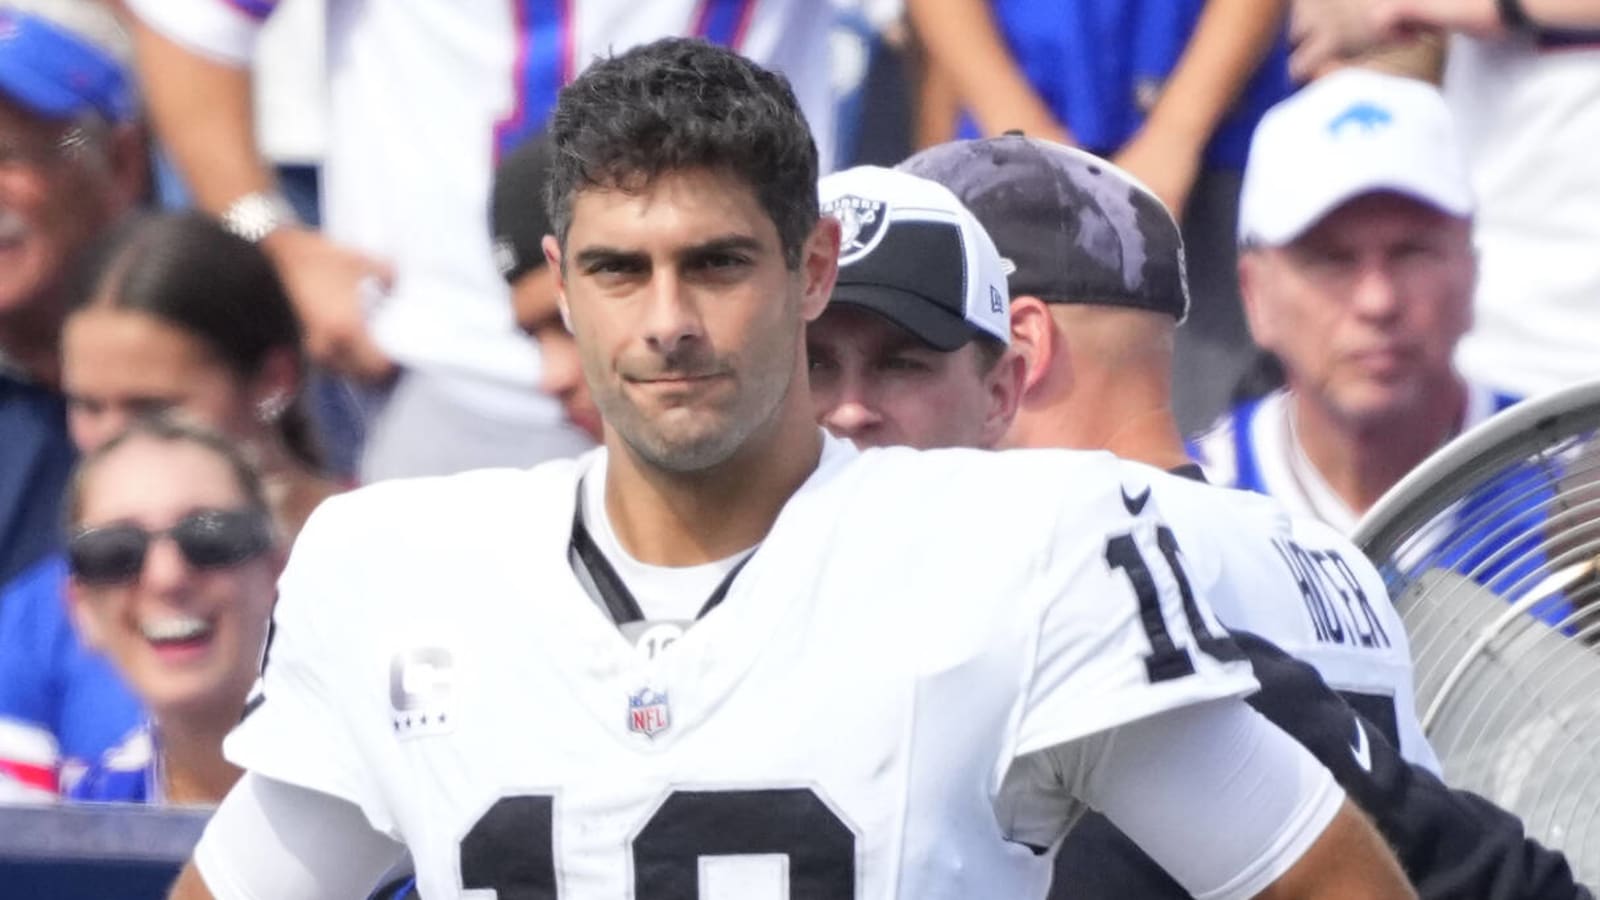 Jimmy Garoppolo explains what led to his suspension